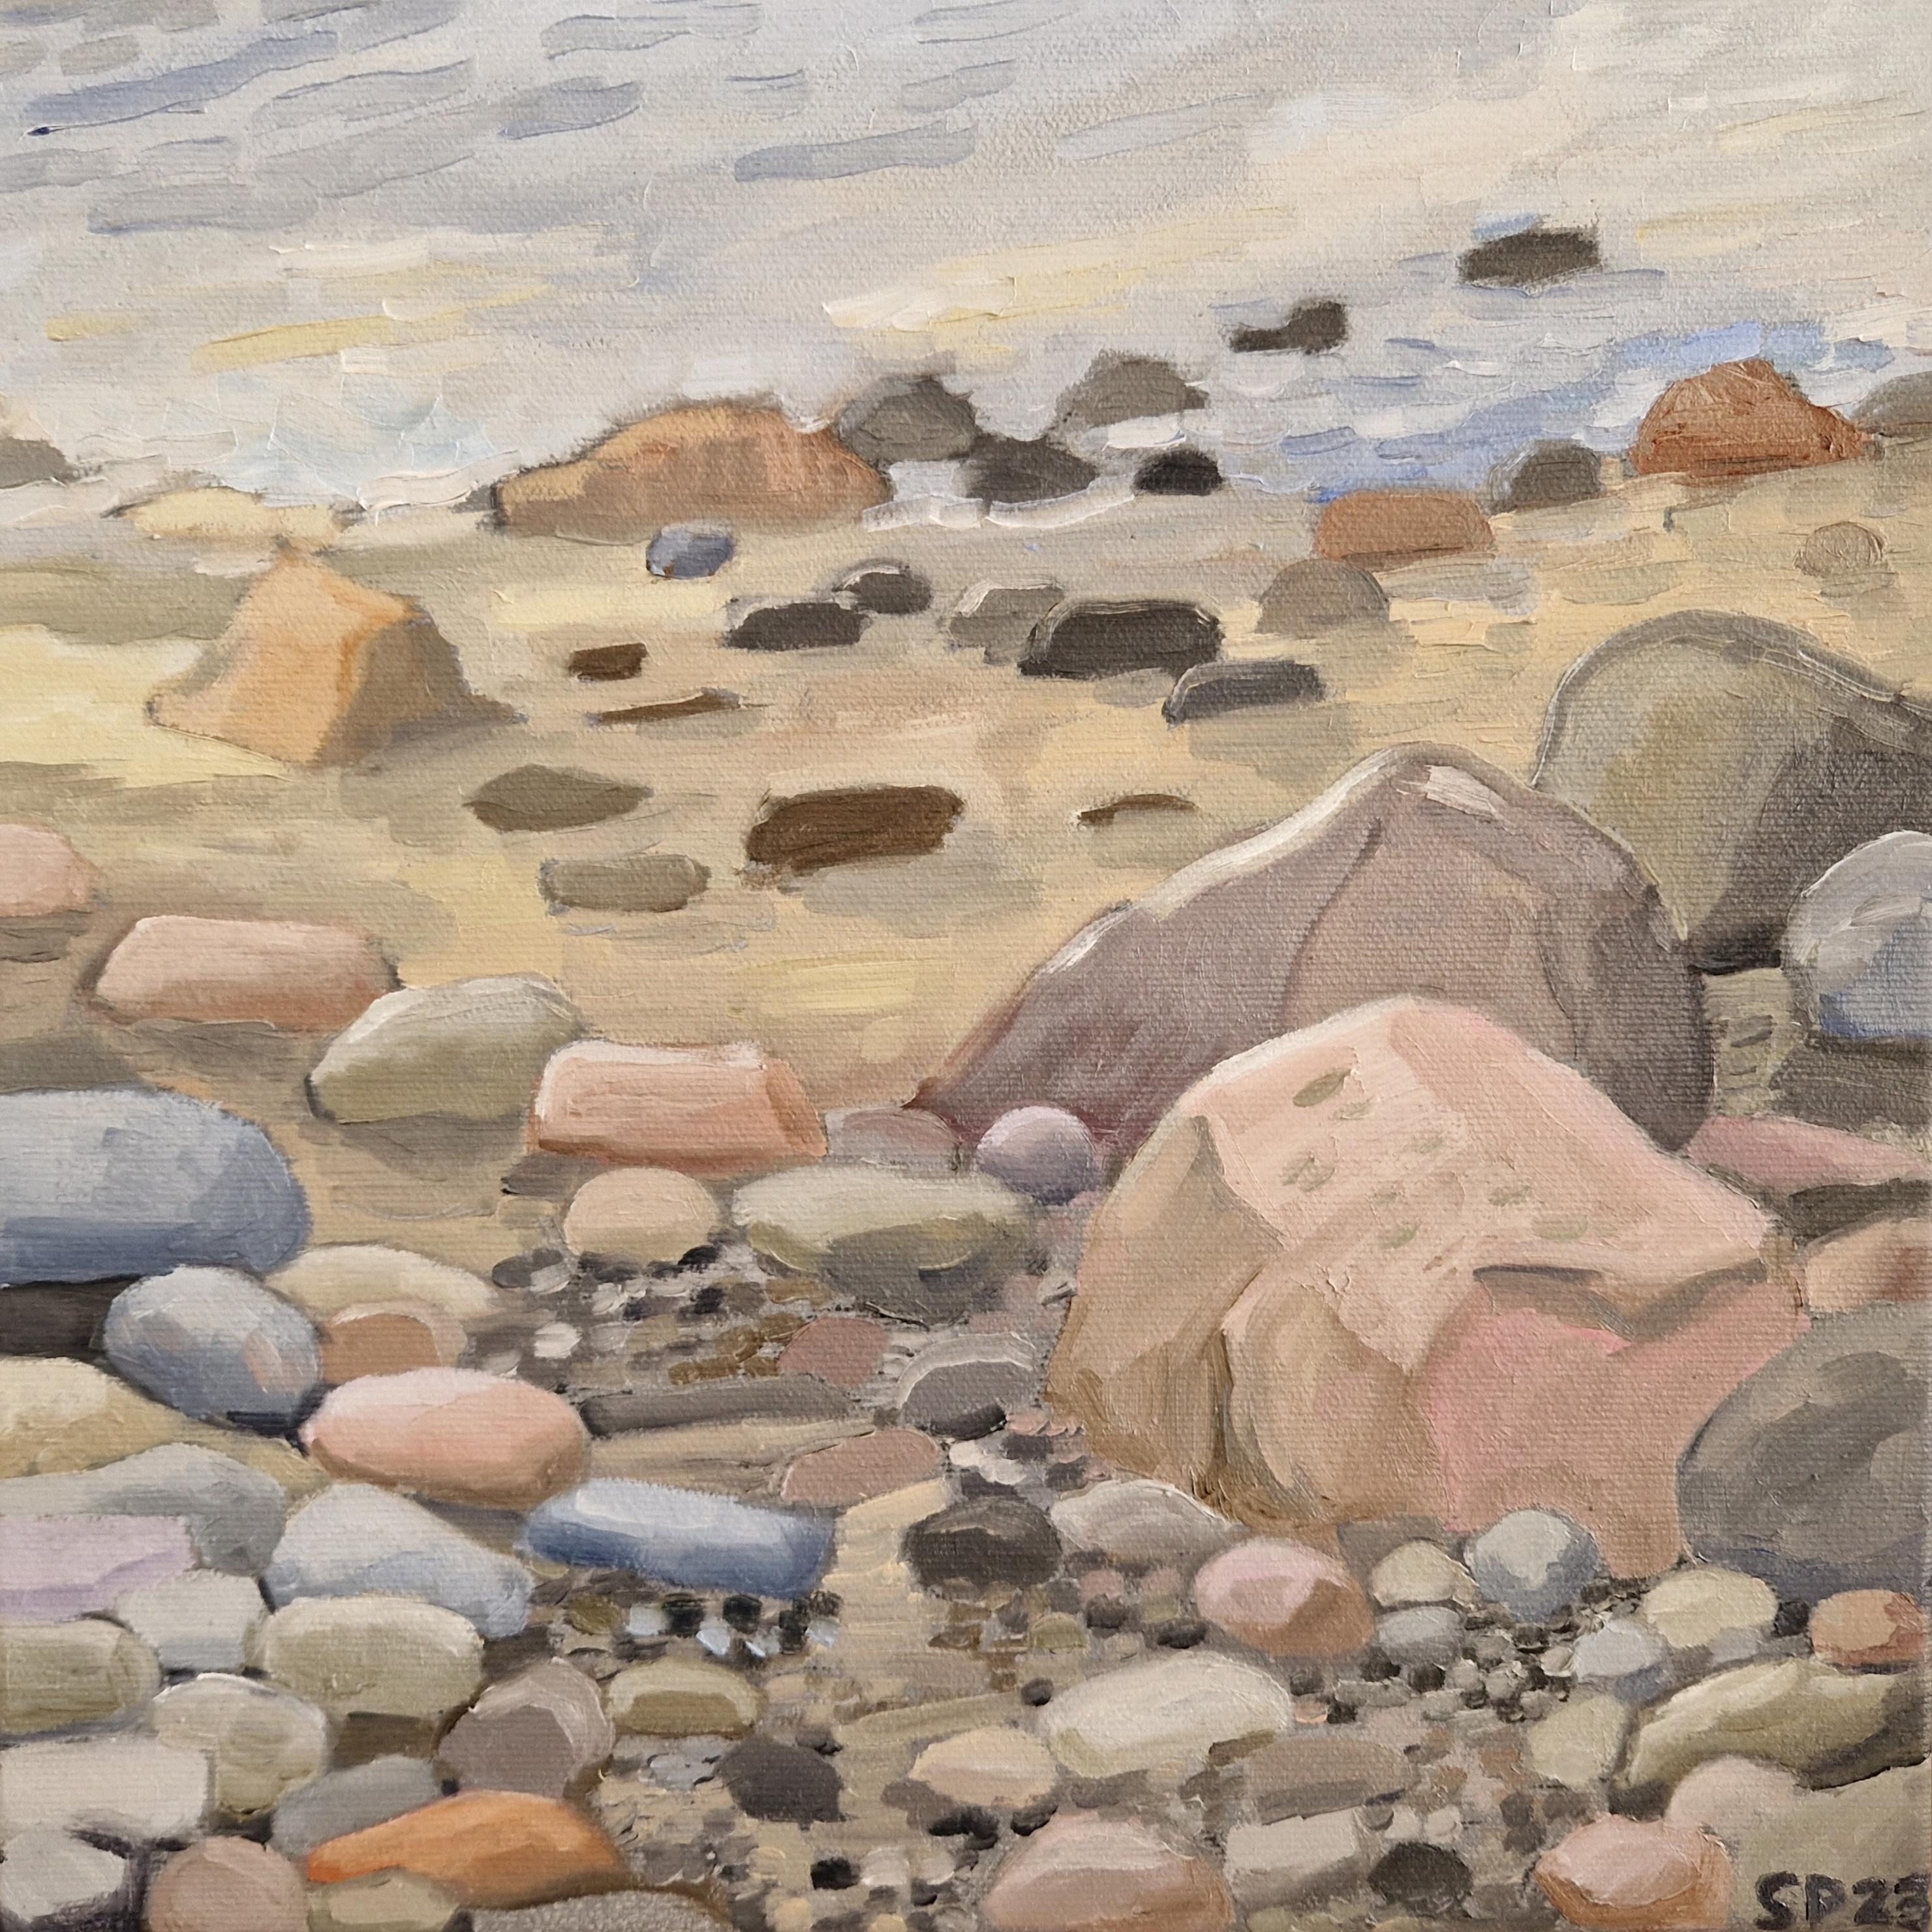 A painting from the 'Seascapes' category